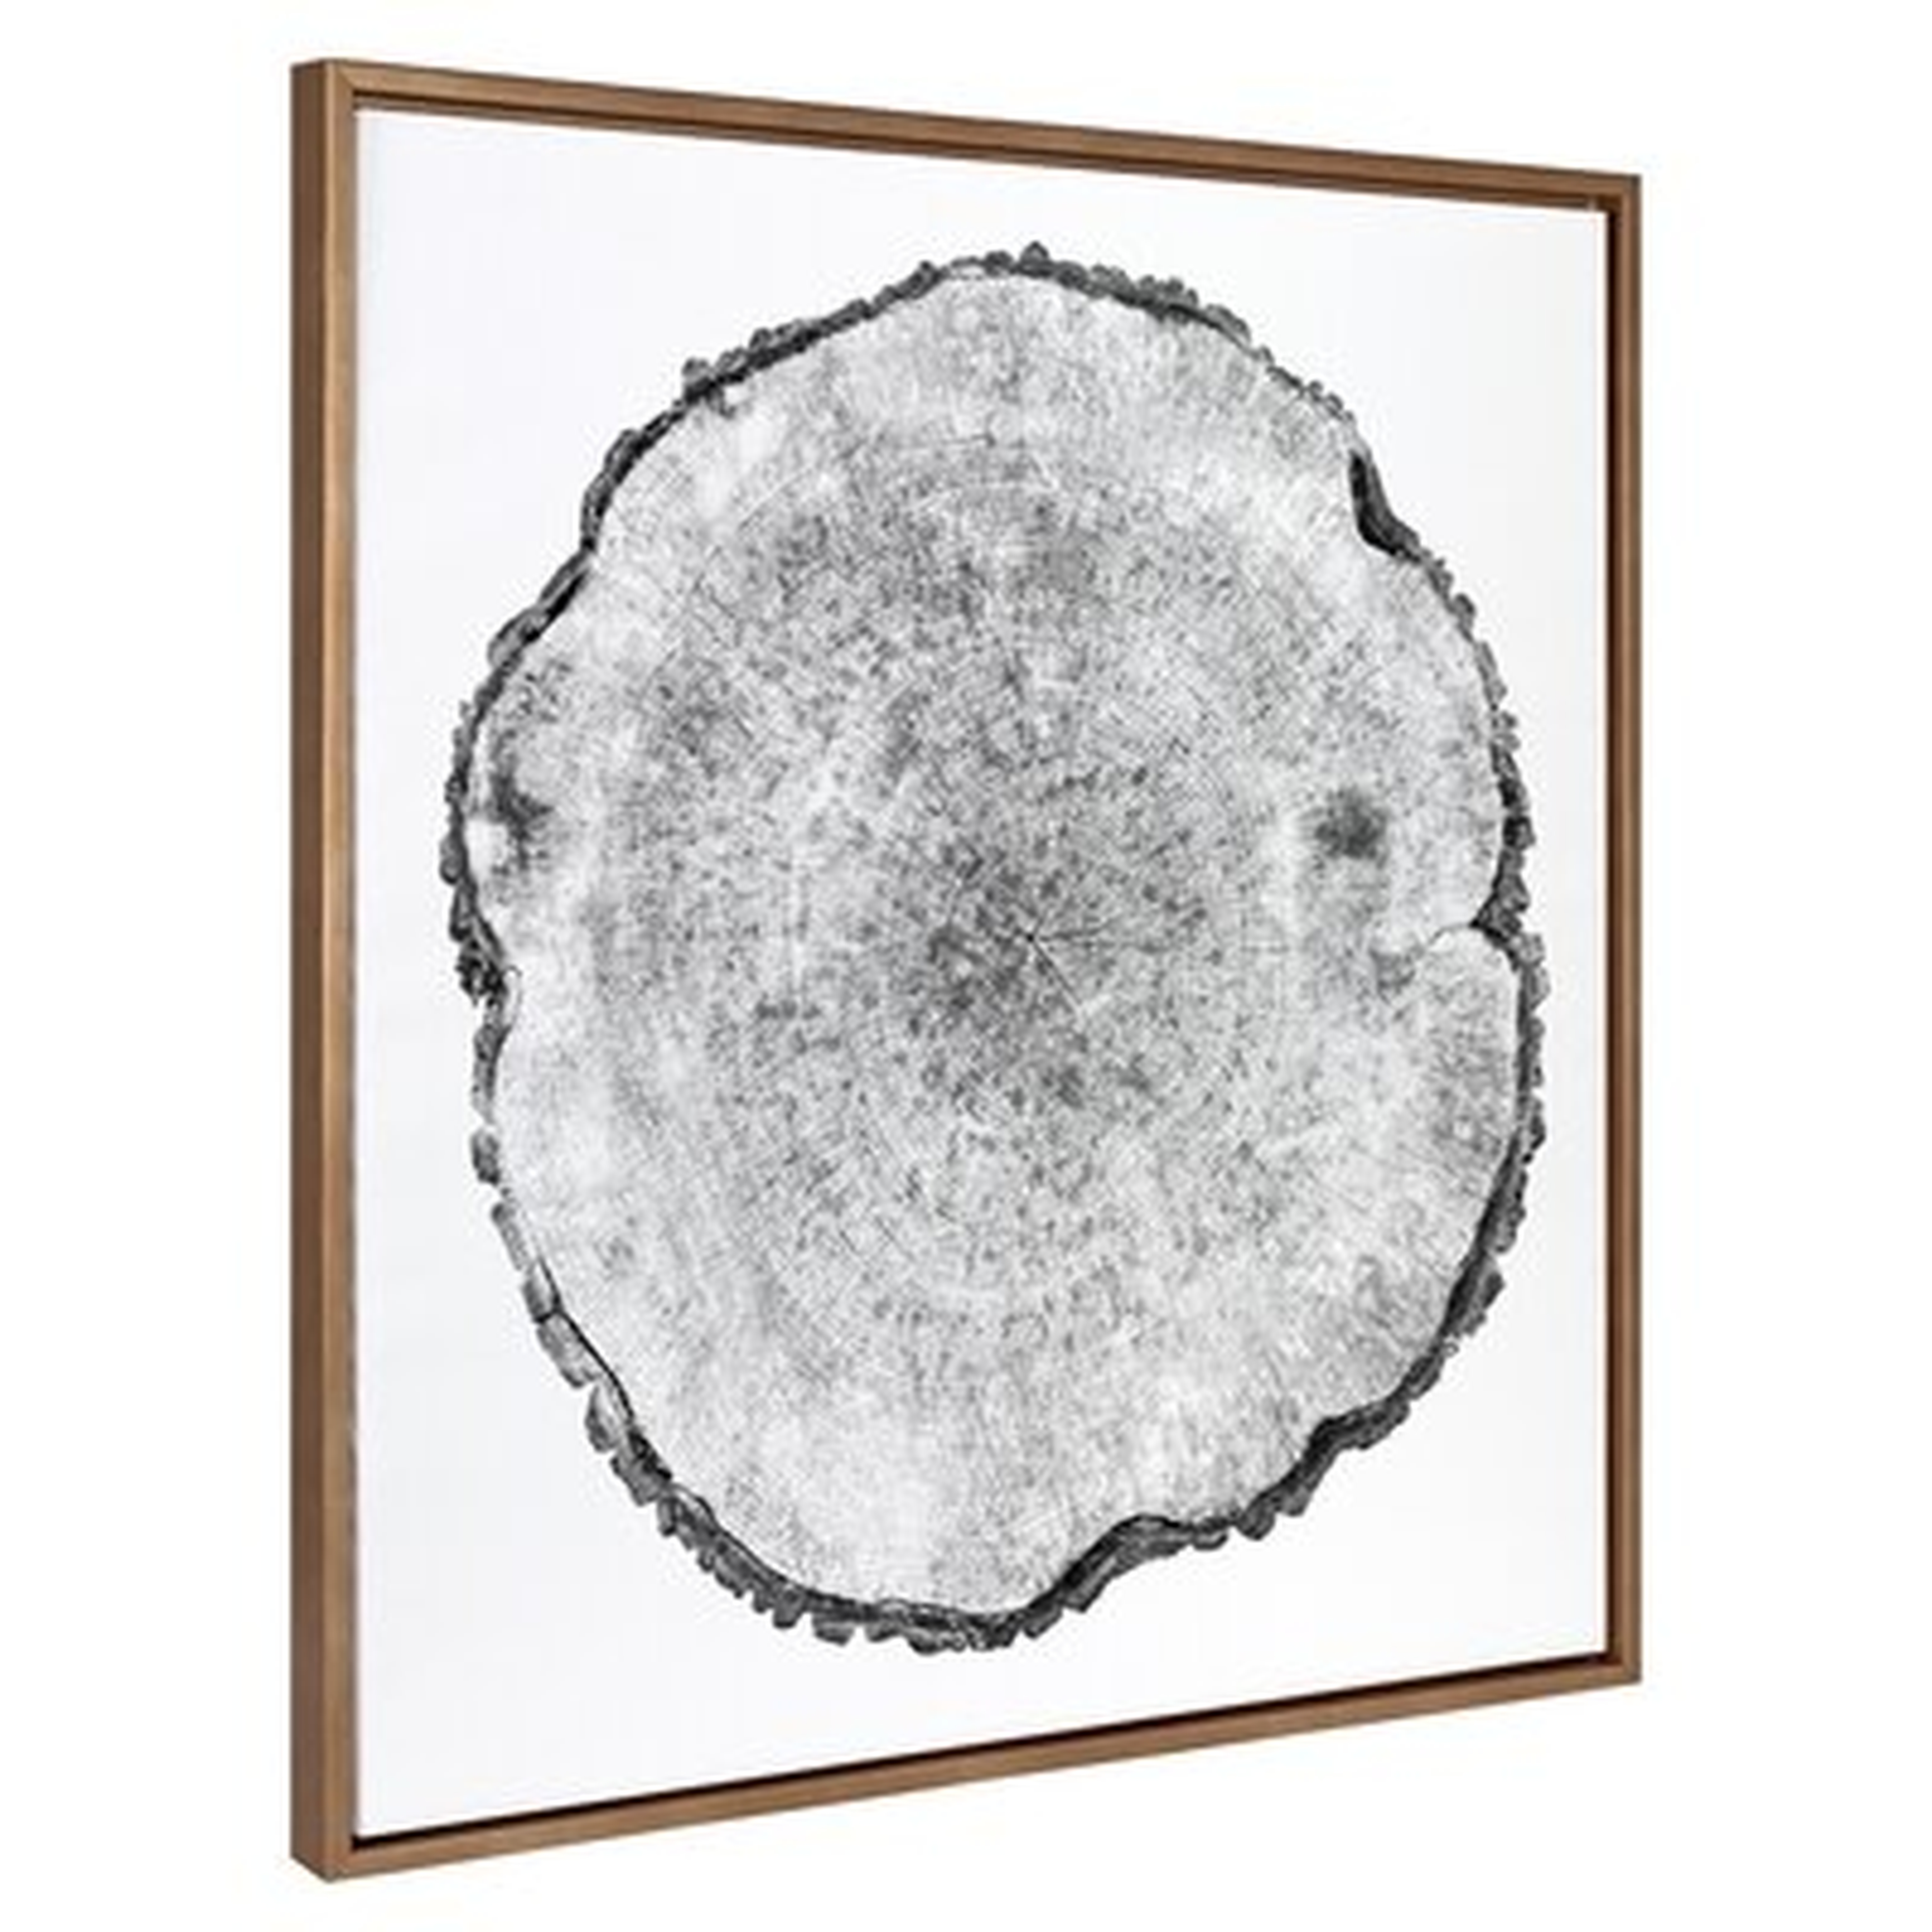 Millwood Pines Sylvie Tree Rings Framed Canvas By Emiko And Mark Franzen Of F2images 30X30 Gold - Wayfair